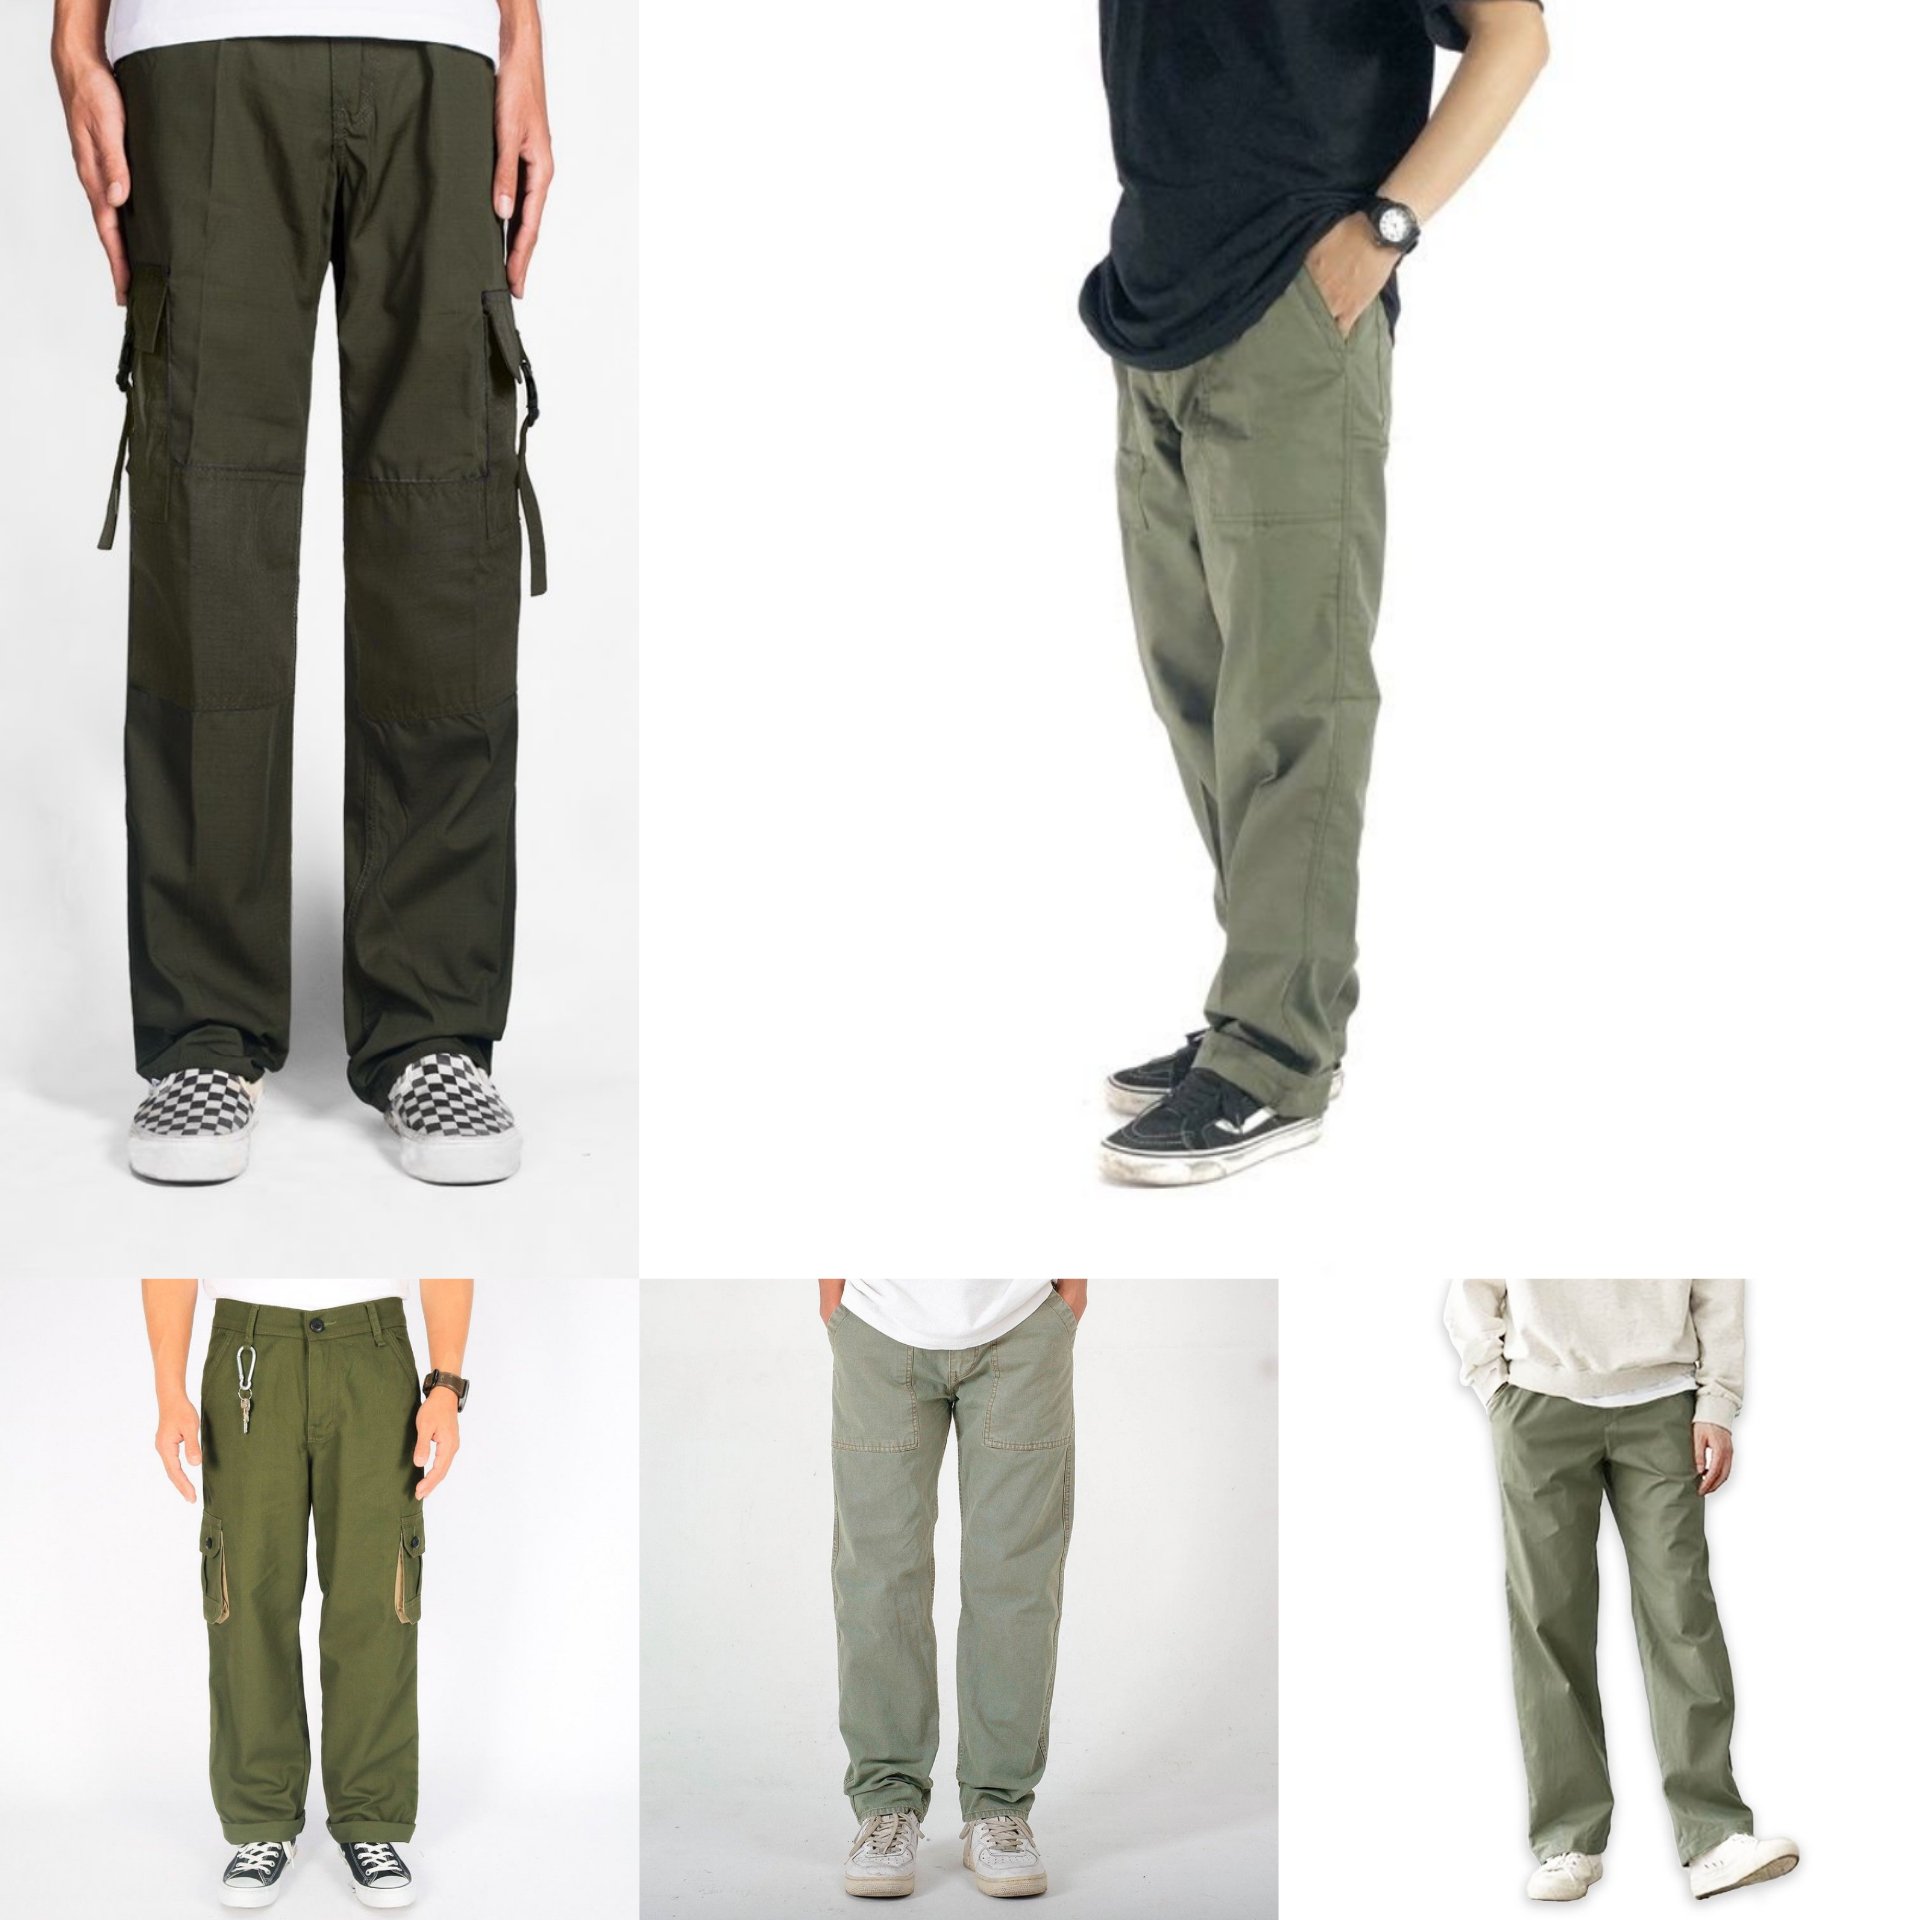 Olive Cargo Pants with Camouflage Bag Casual Warm Weather Outfits In Their  20s (2 ideas & outfits) | Lookastic